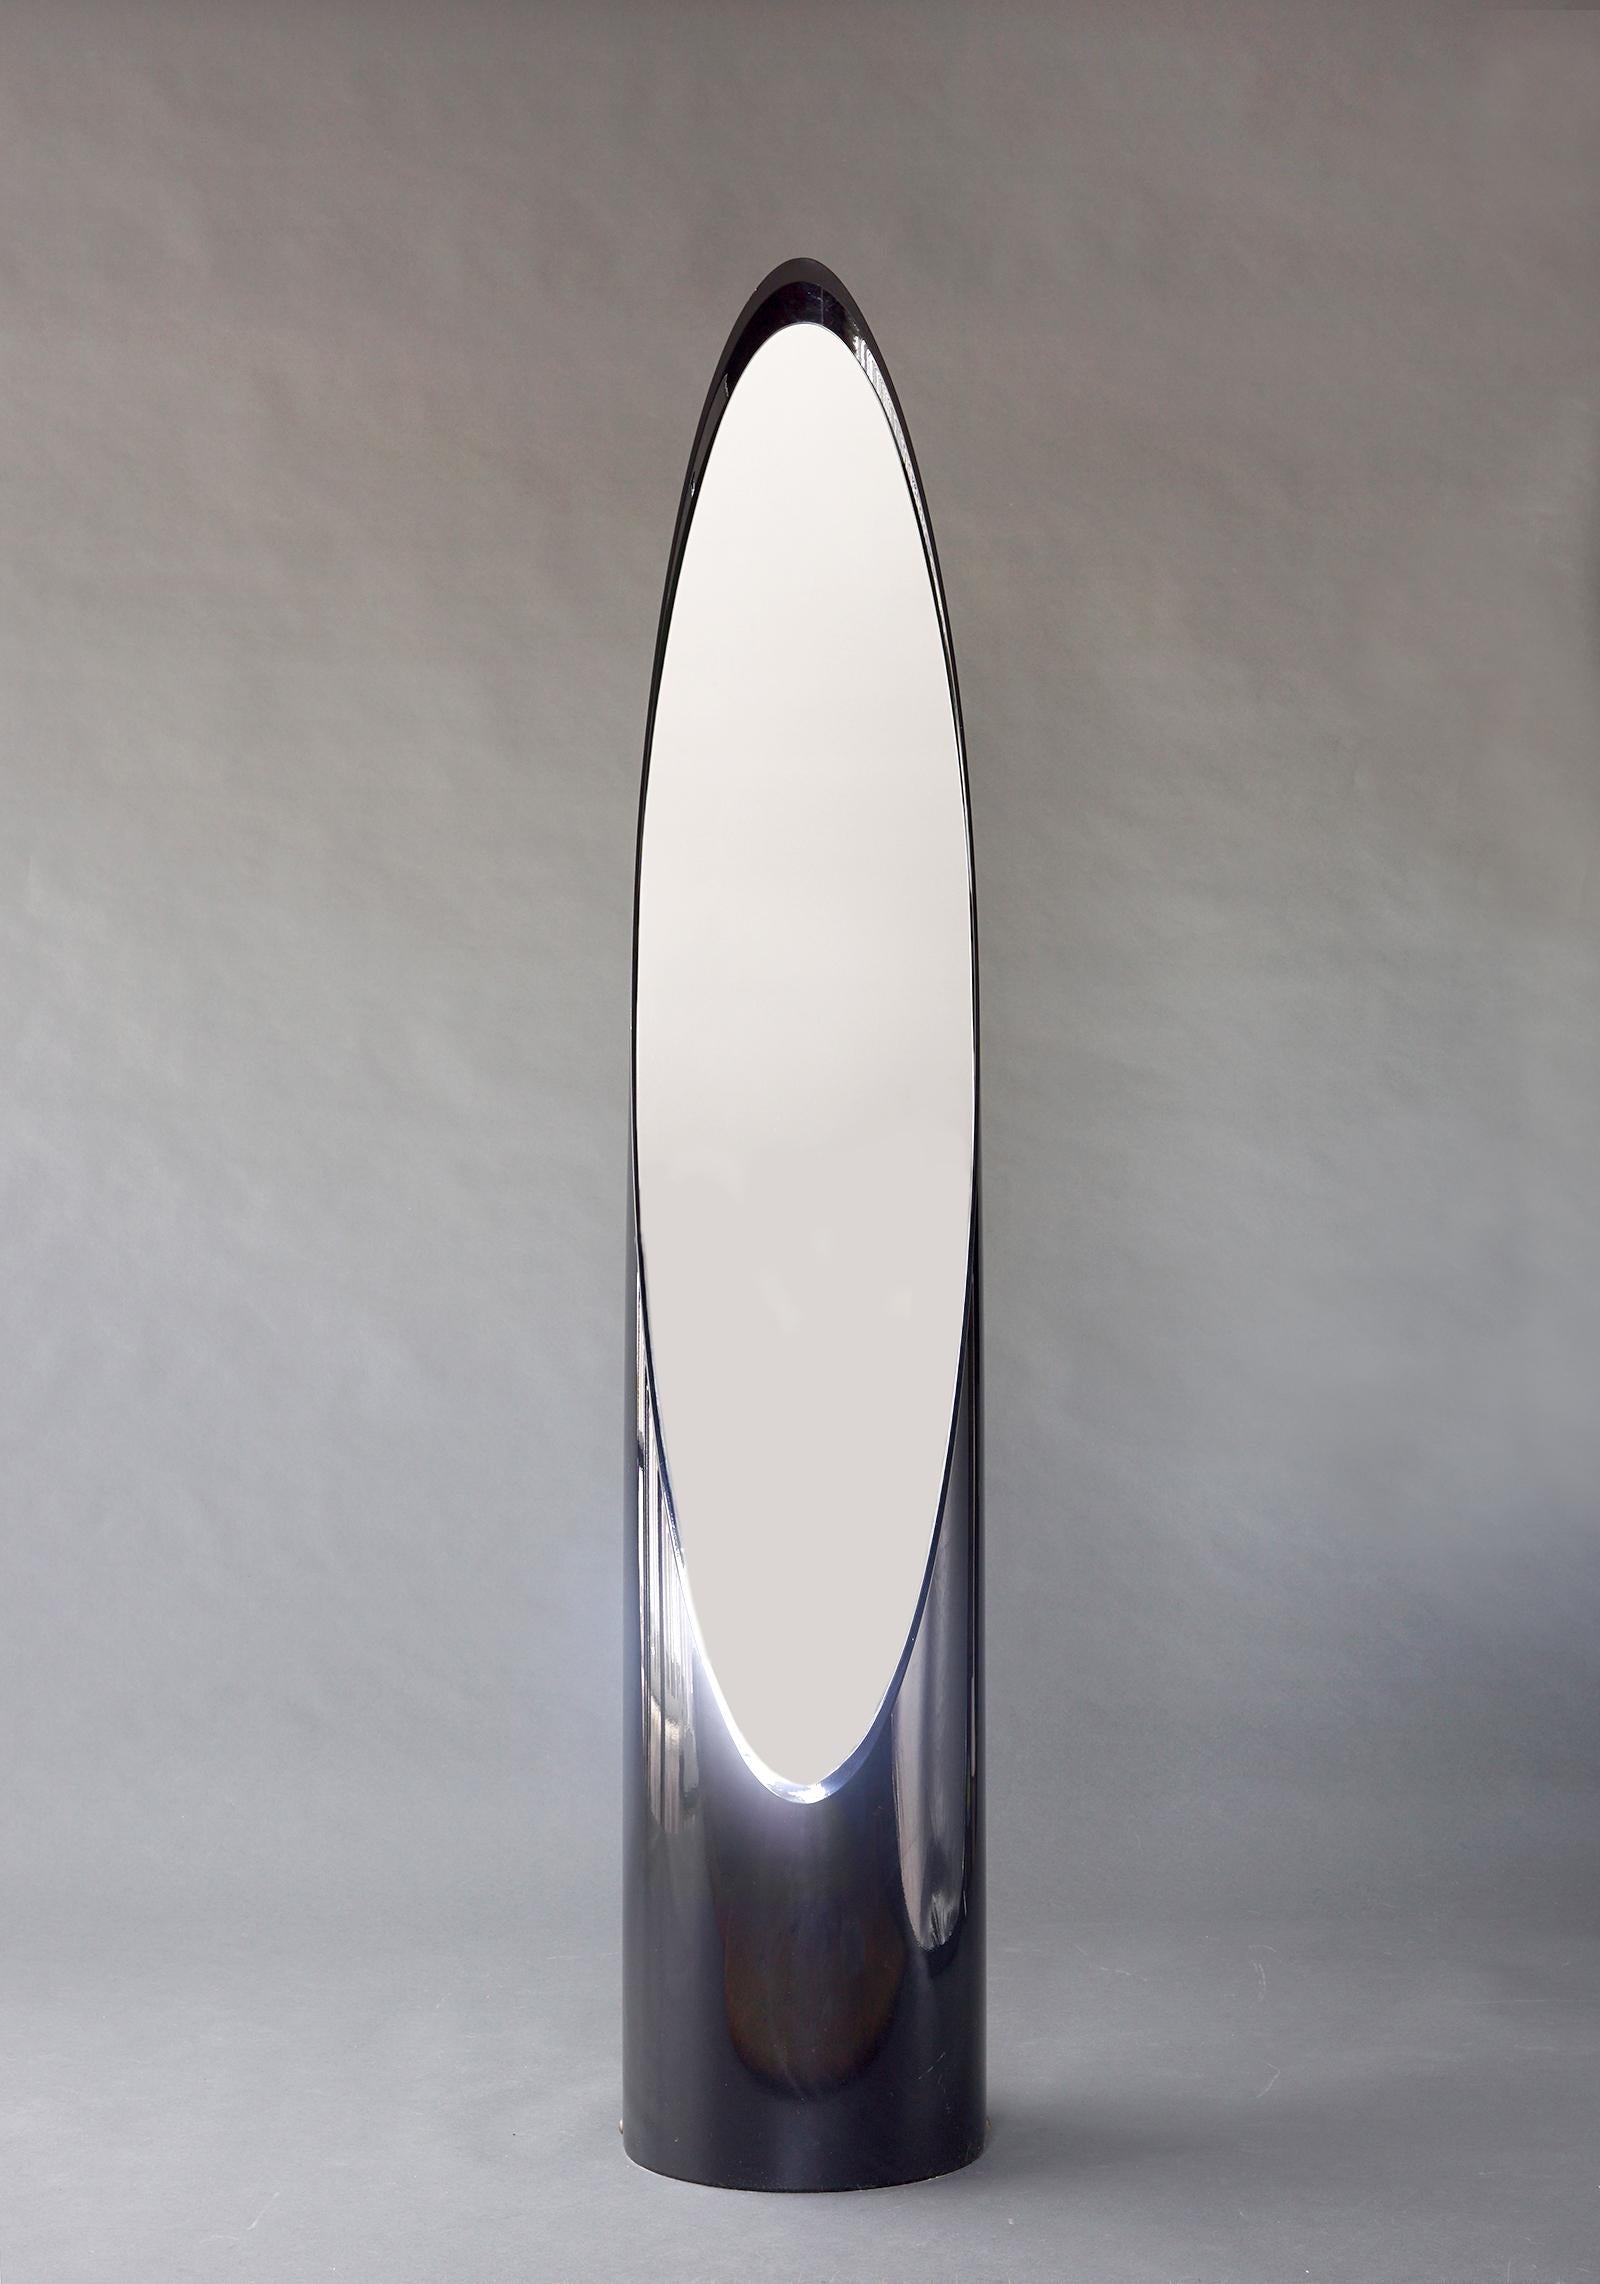 Lipstick Mirror attributed to Roger Lecal 9